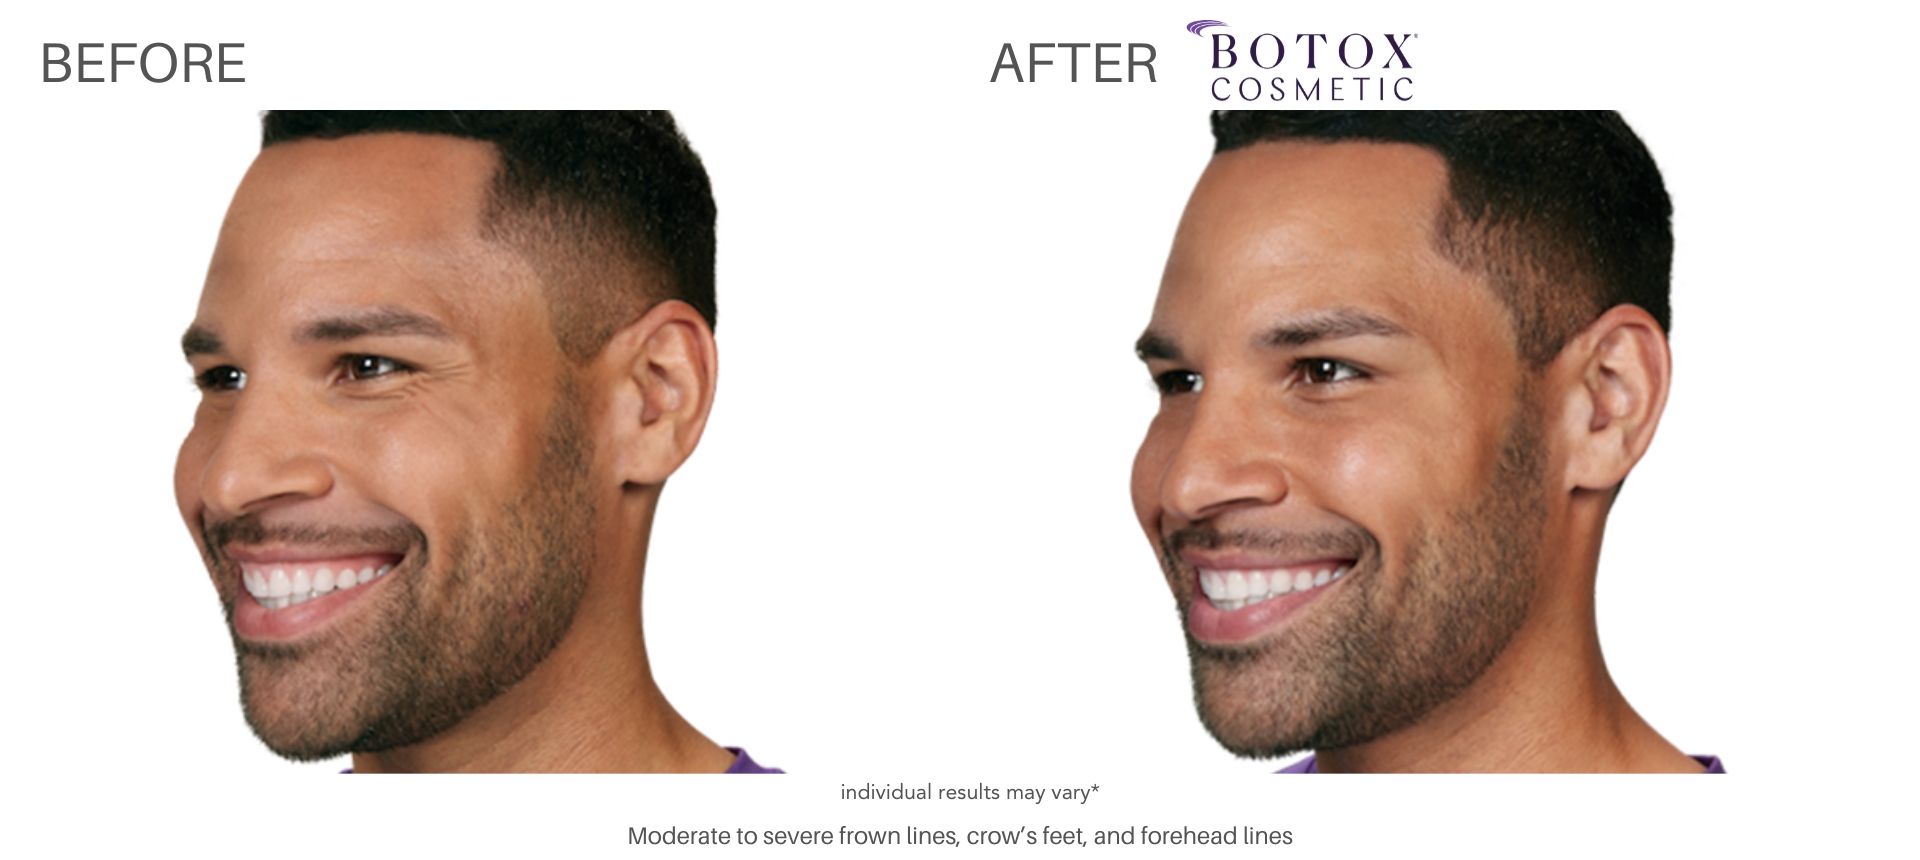 Man's botox before and after images of crows feet results at Laser + Skin Institute in Chatham, NJ.